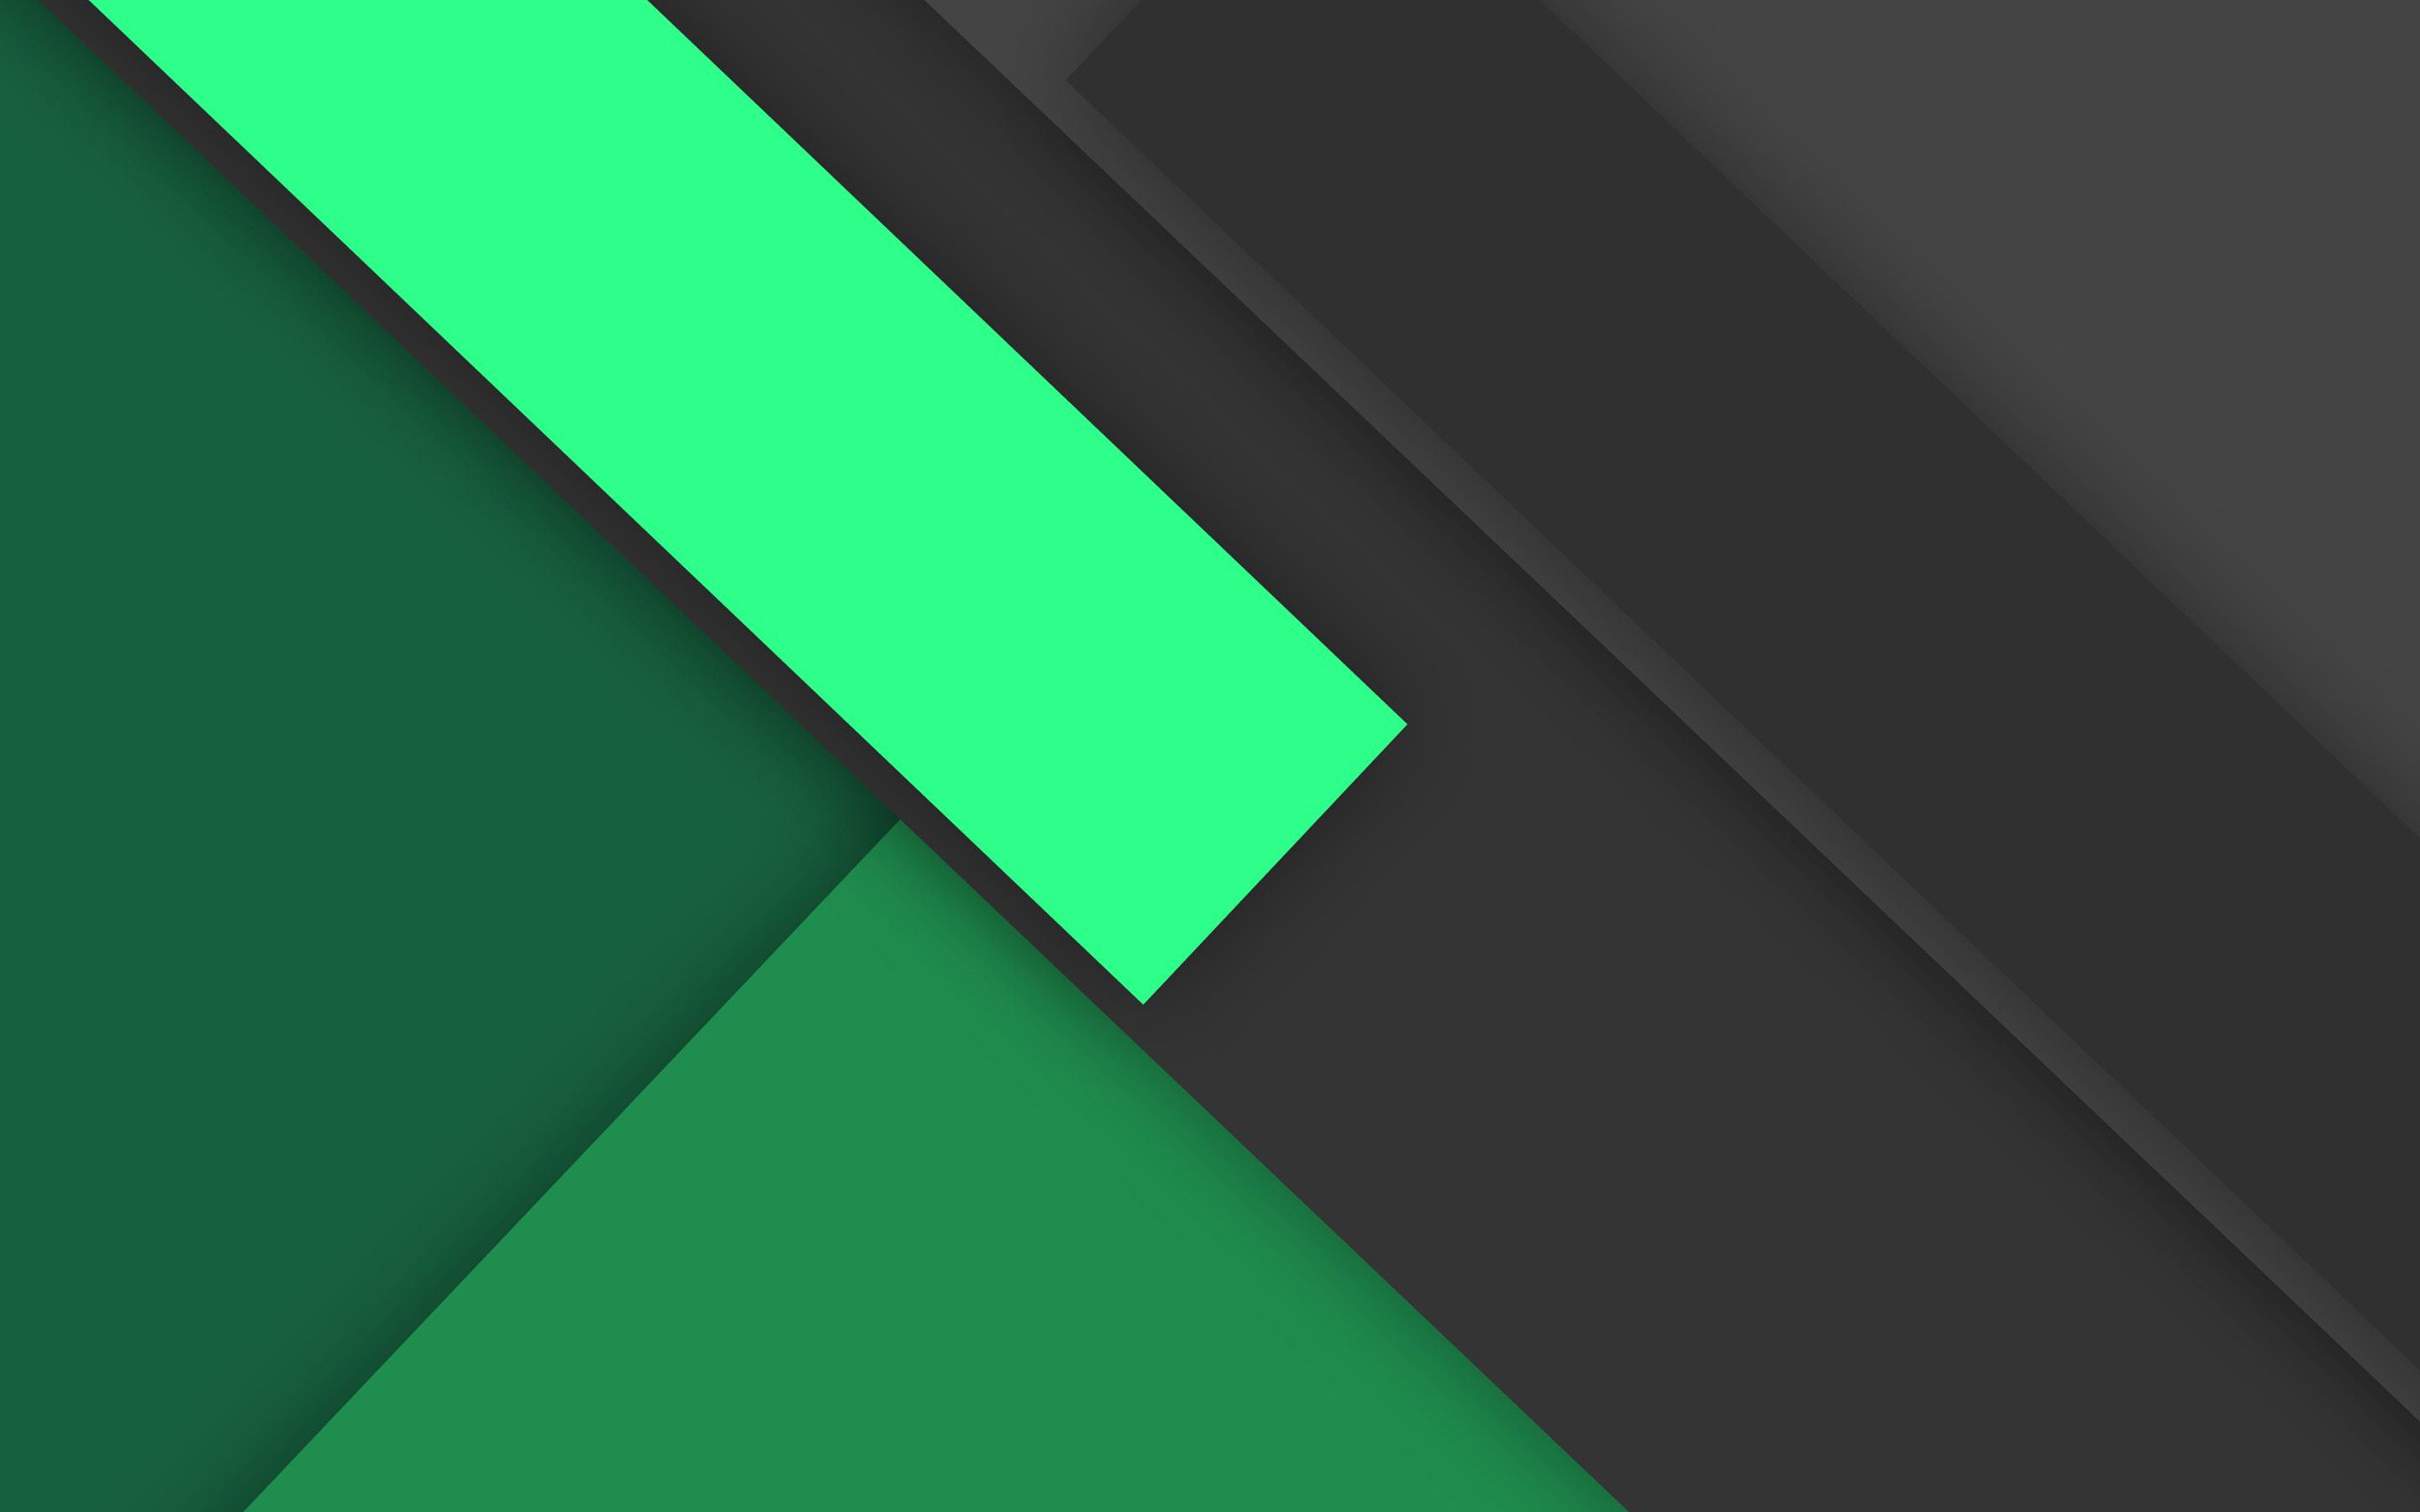 Download wallpaper 4k, material design, green and black, geometric shapes, lines, lollipop, geometry, creative, strips, green background, abstract art for desktop with resolution 2880x1800. High Quality HD picture wallpaper